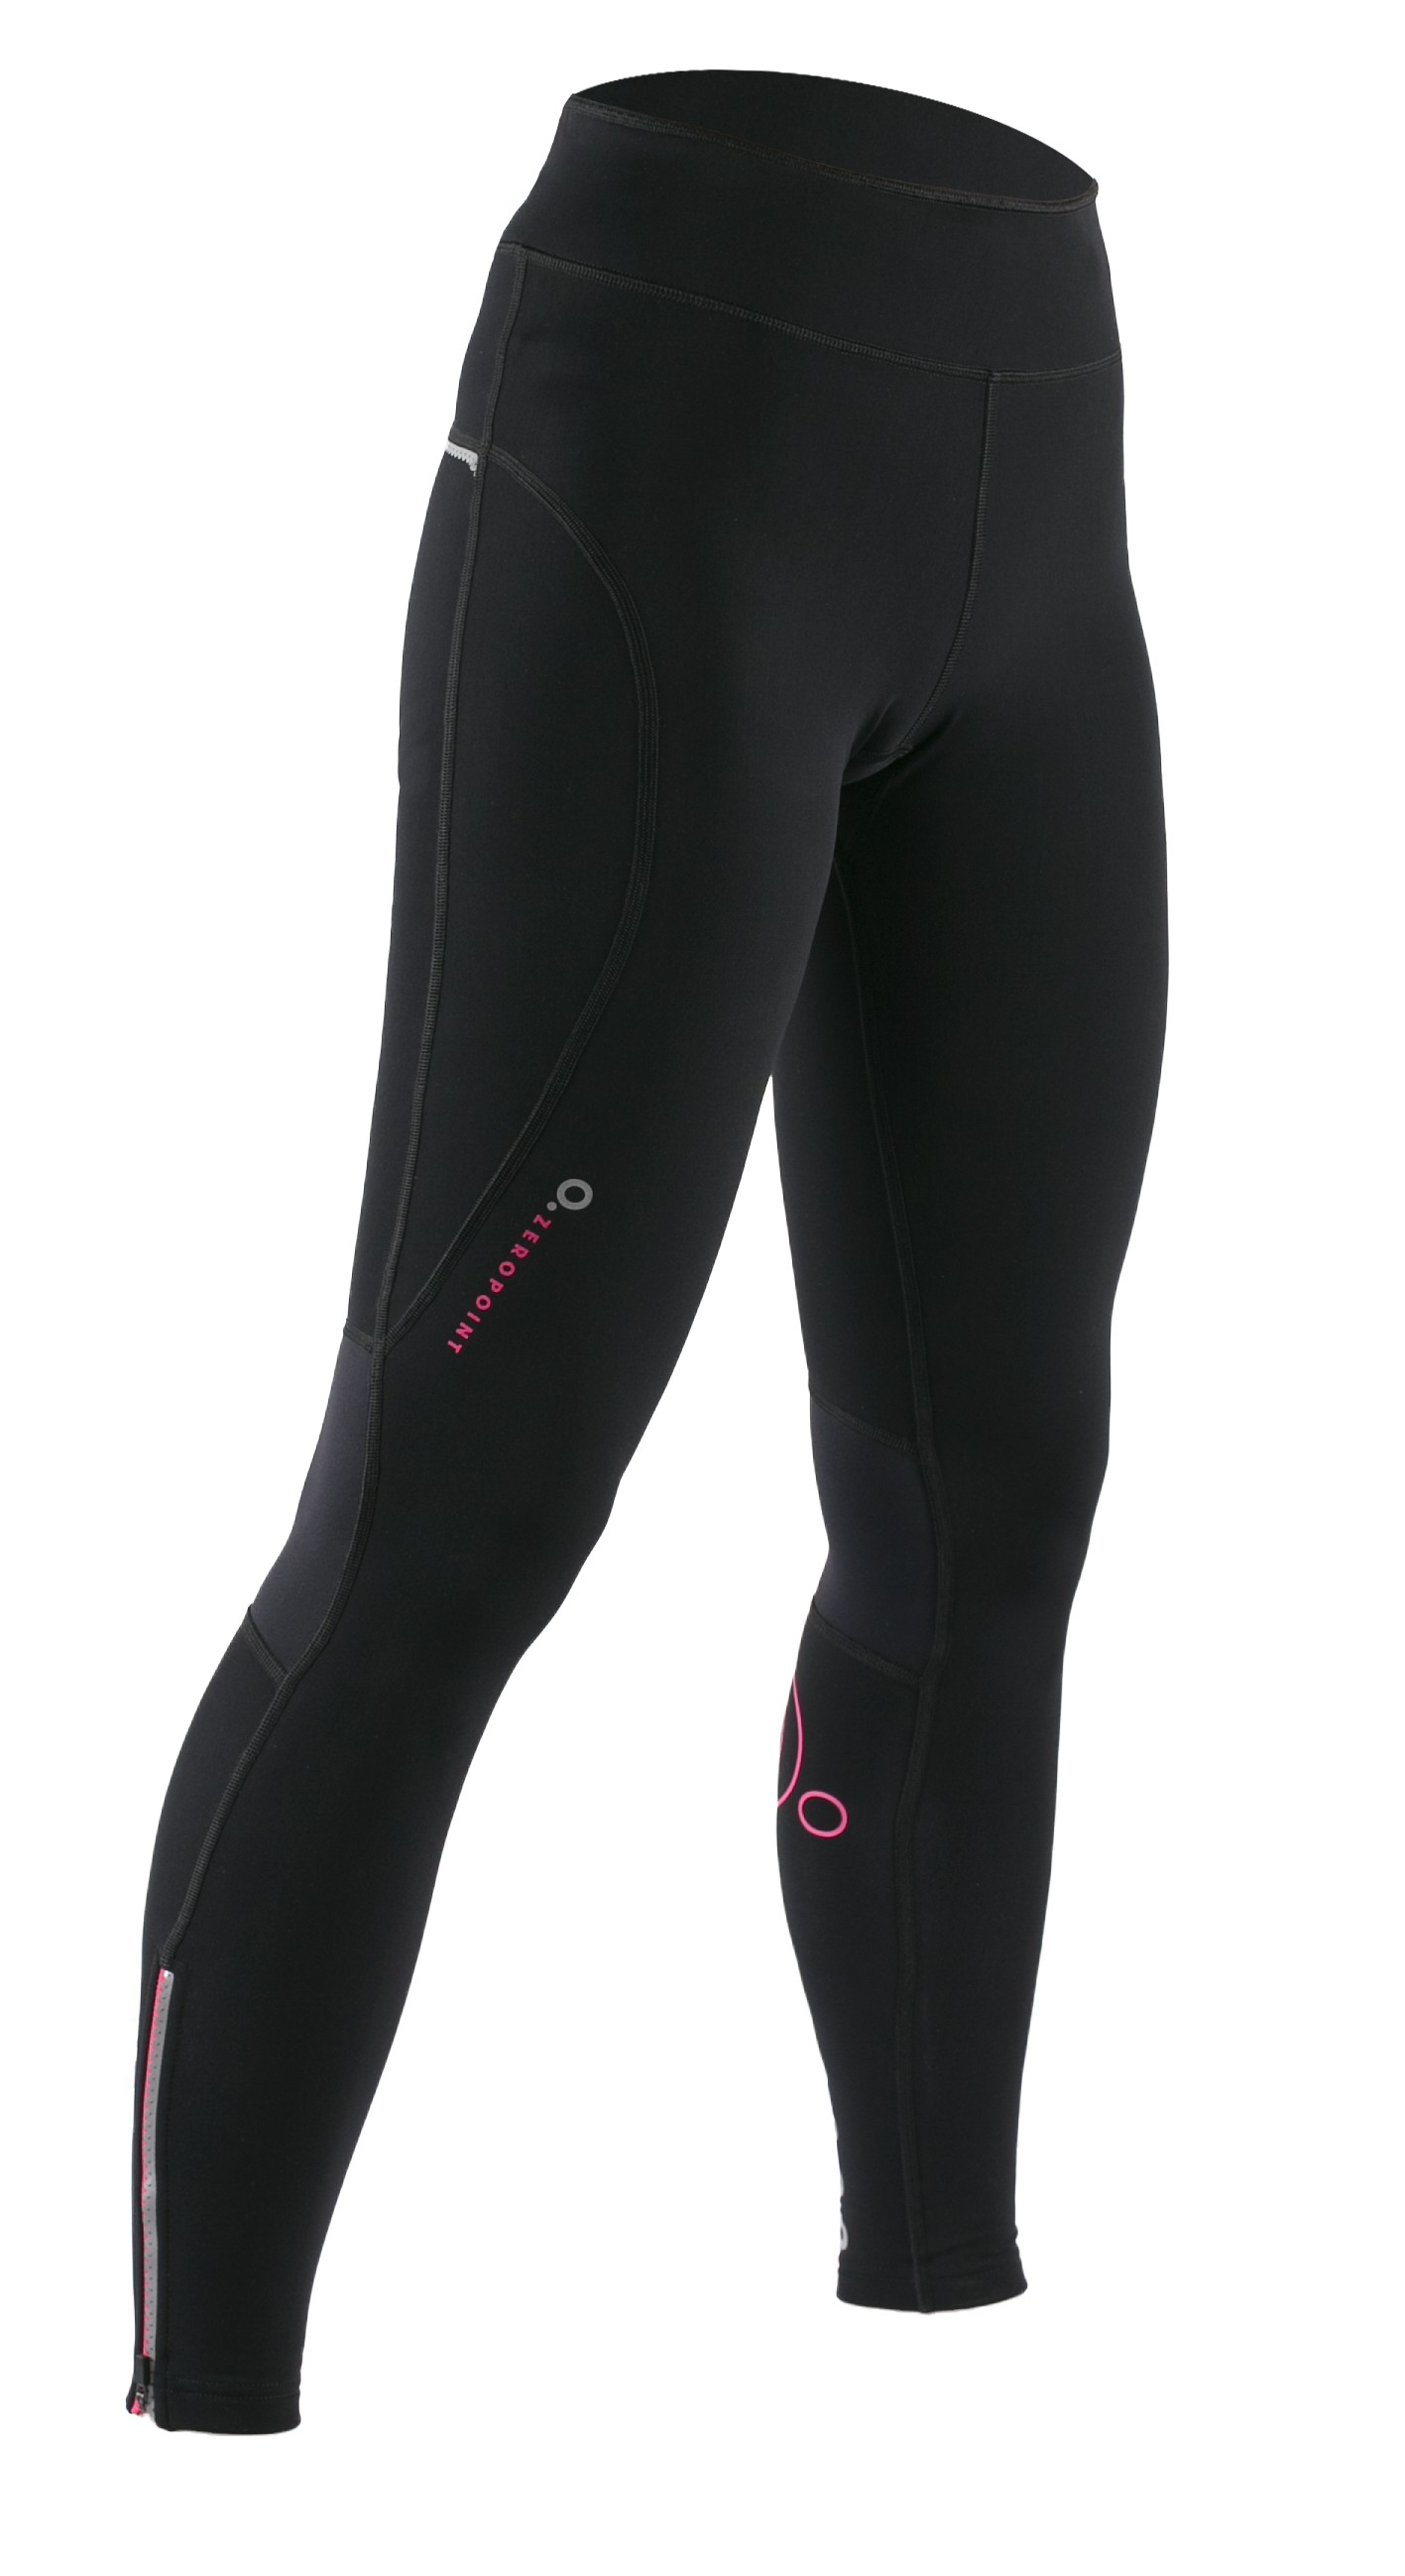 Women's Performance Compression Top - Zeropoint